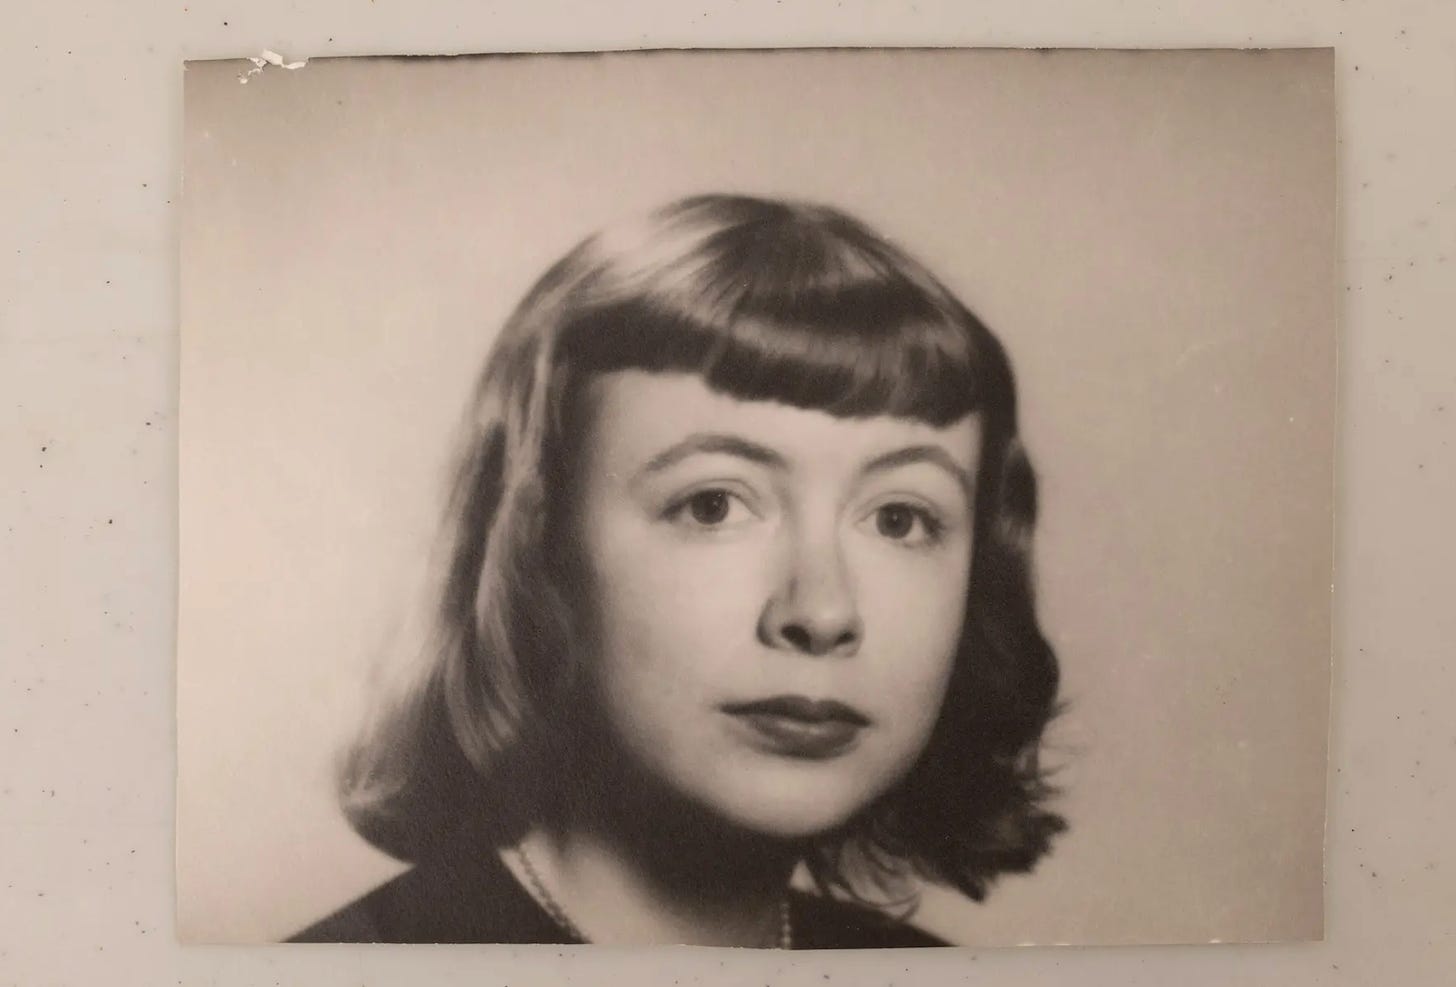 Photo of Joan Didion in the 1950s